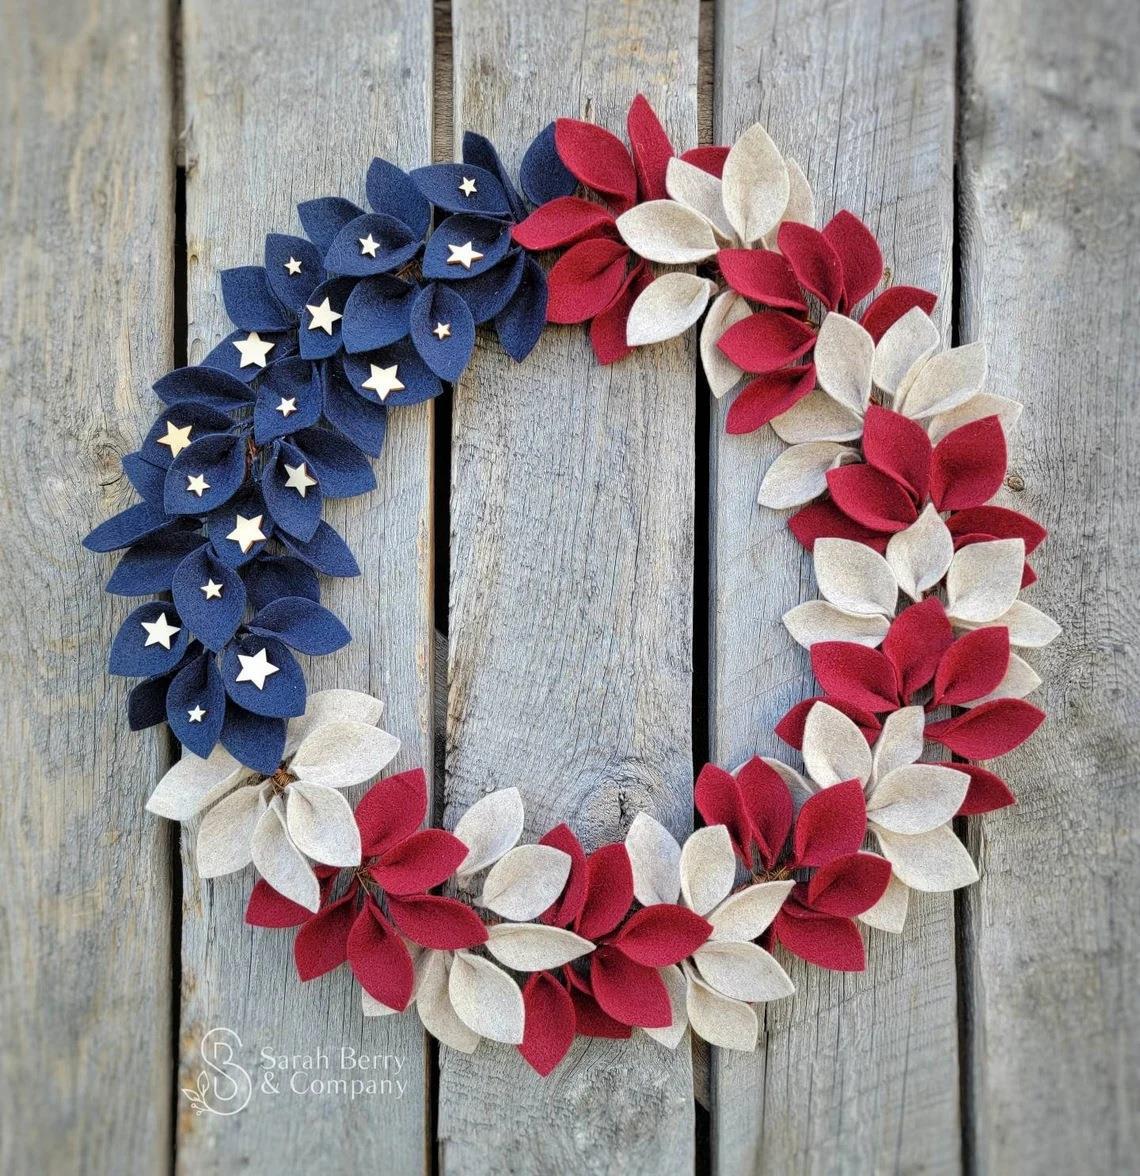 4th of July decorations, American flag decorations, Patriotic decorations, Red, white and blue decorations, July 4th wreaths, July 4th garlands, July 4th centerpieces, Holiday Showcase Tool Independence Day Garland